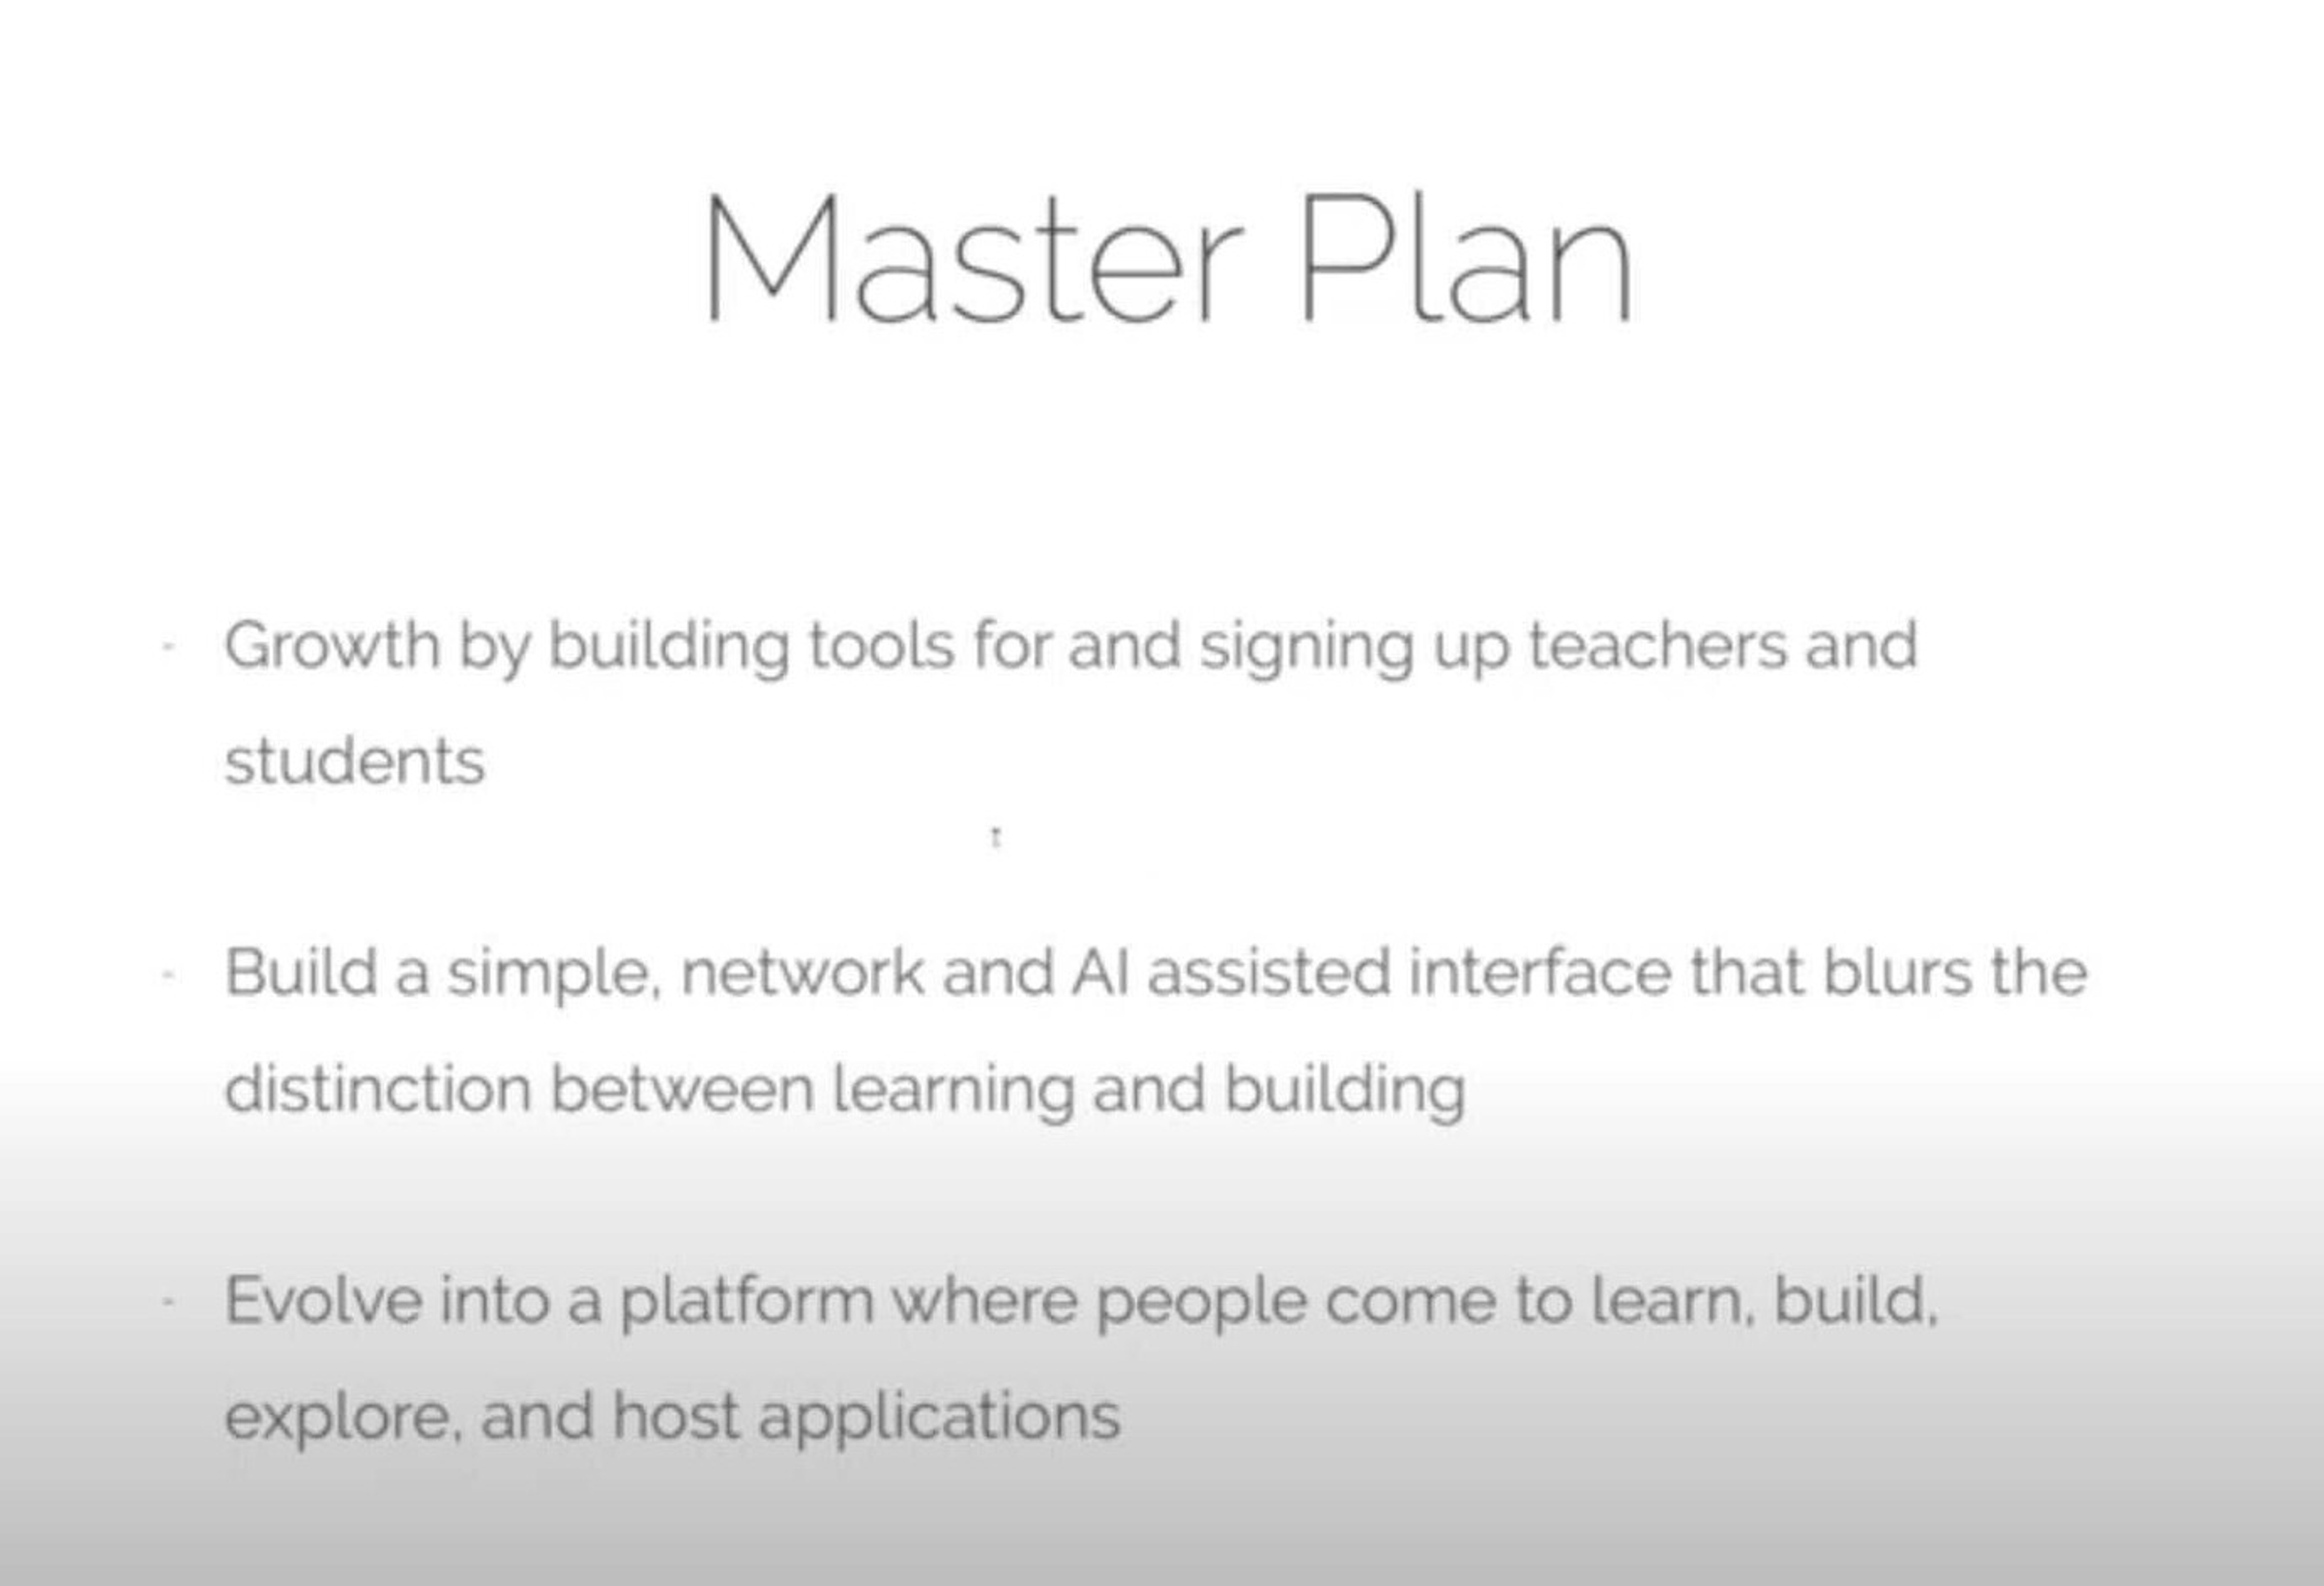 Master plan slide from pitch deck